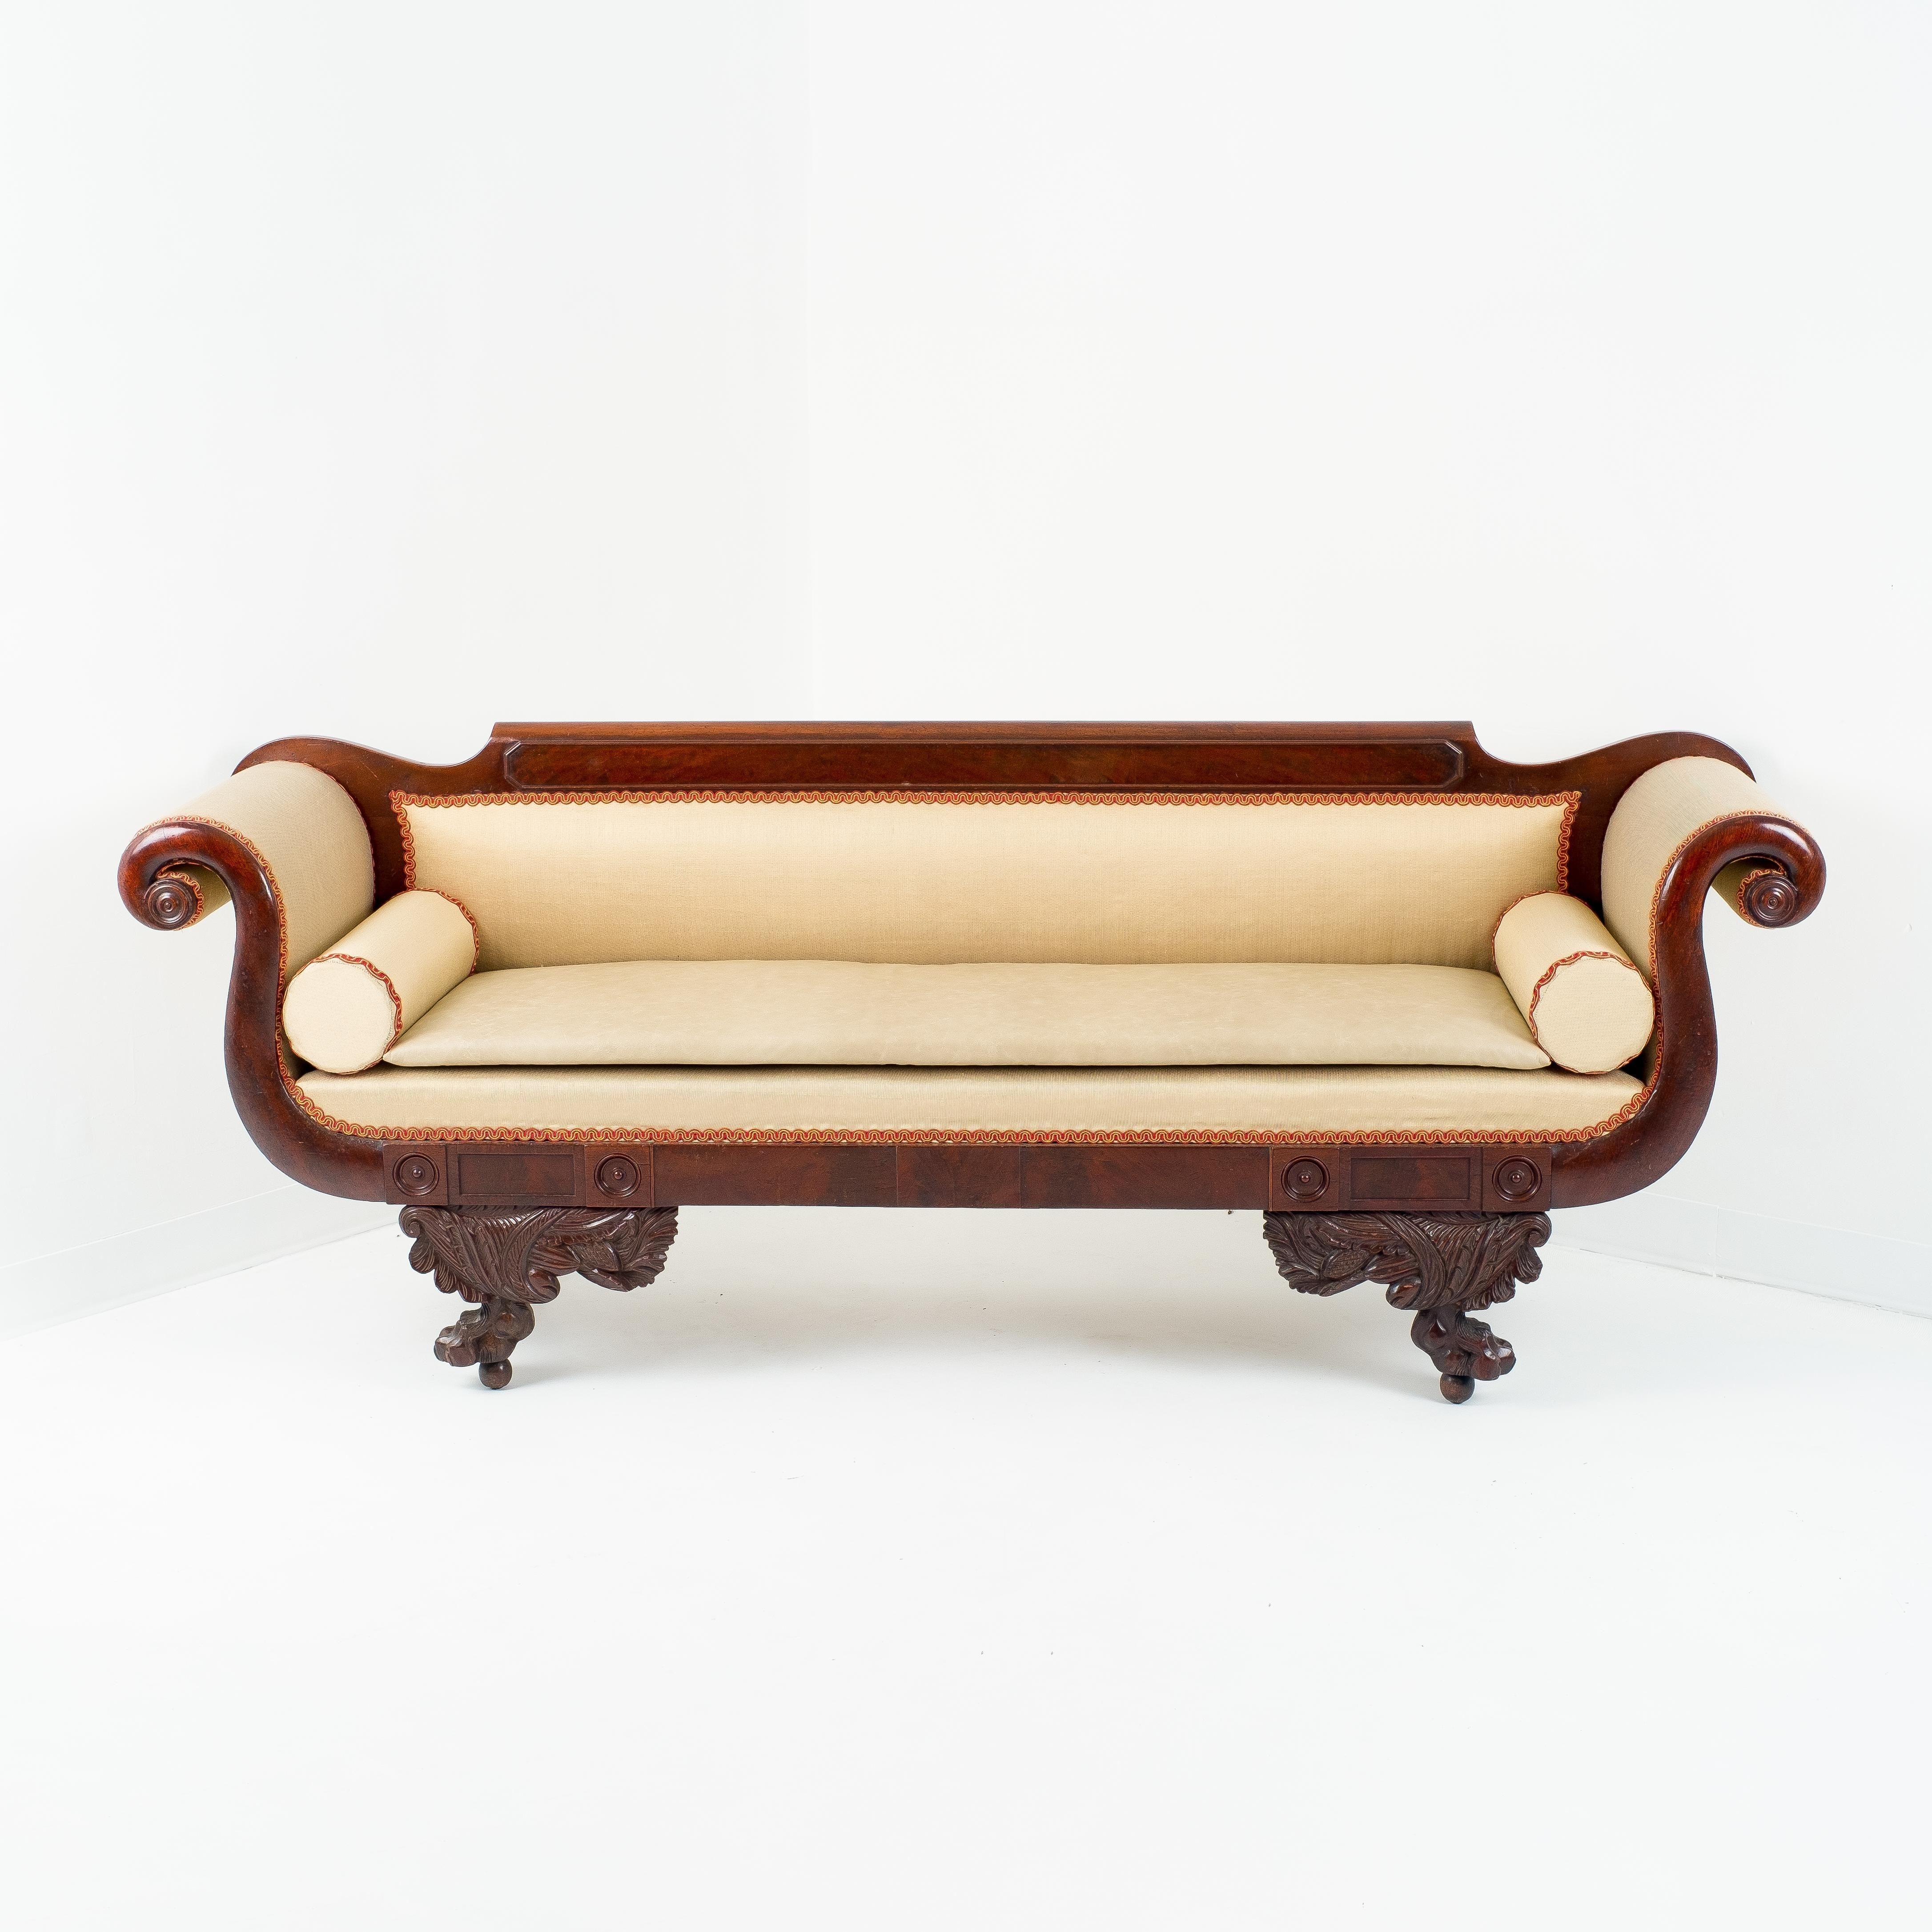 American Neoclassic sofa with mahogany frame upholstered in silk with contrasting gimp. The crest rail has a panel of branch crotch mahogany book matched across the length of the sofa back. The scrolled arms, lion’s paw legs with cornucopia carved